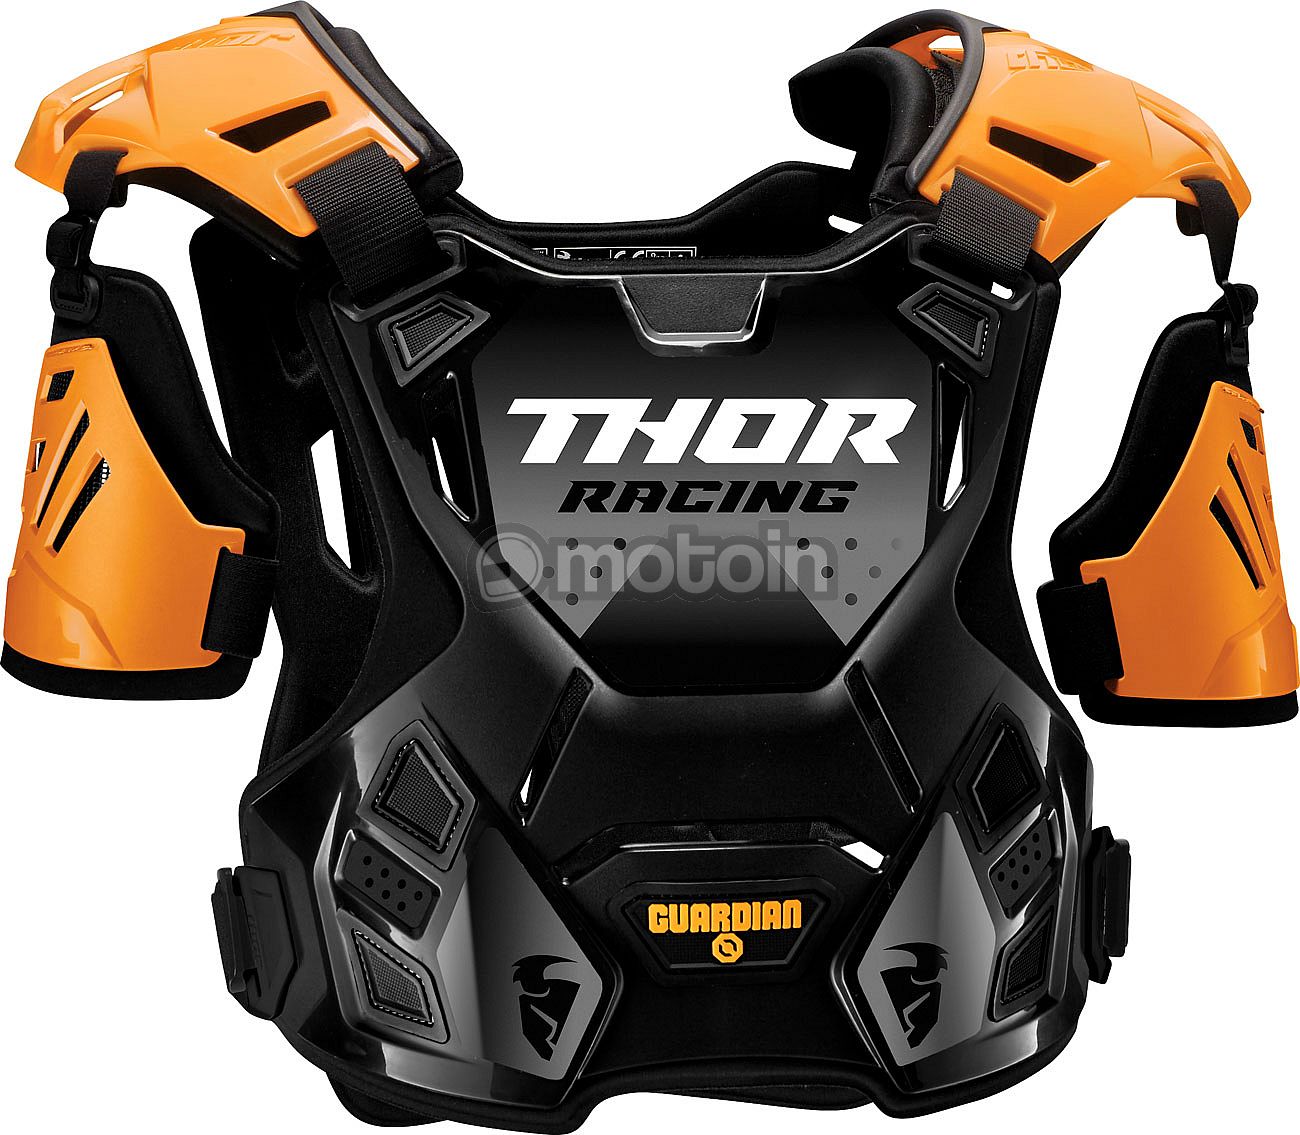 Thor Guardian S22, colete protector